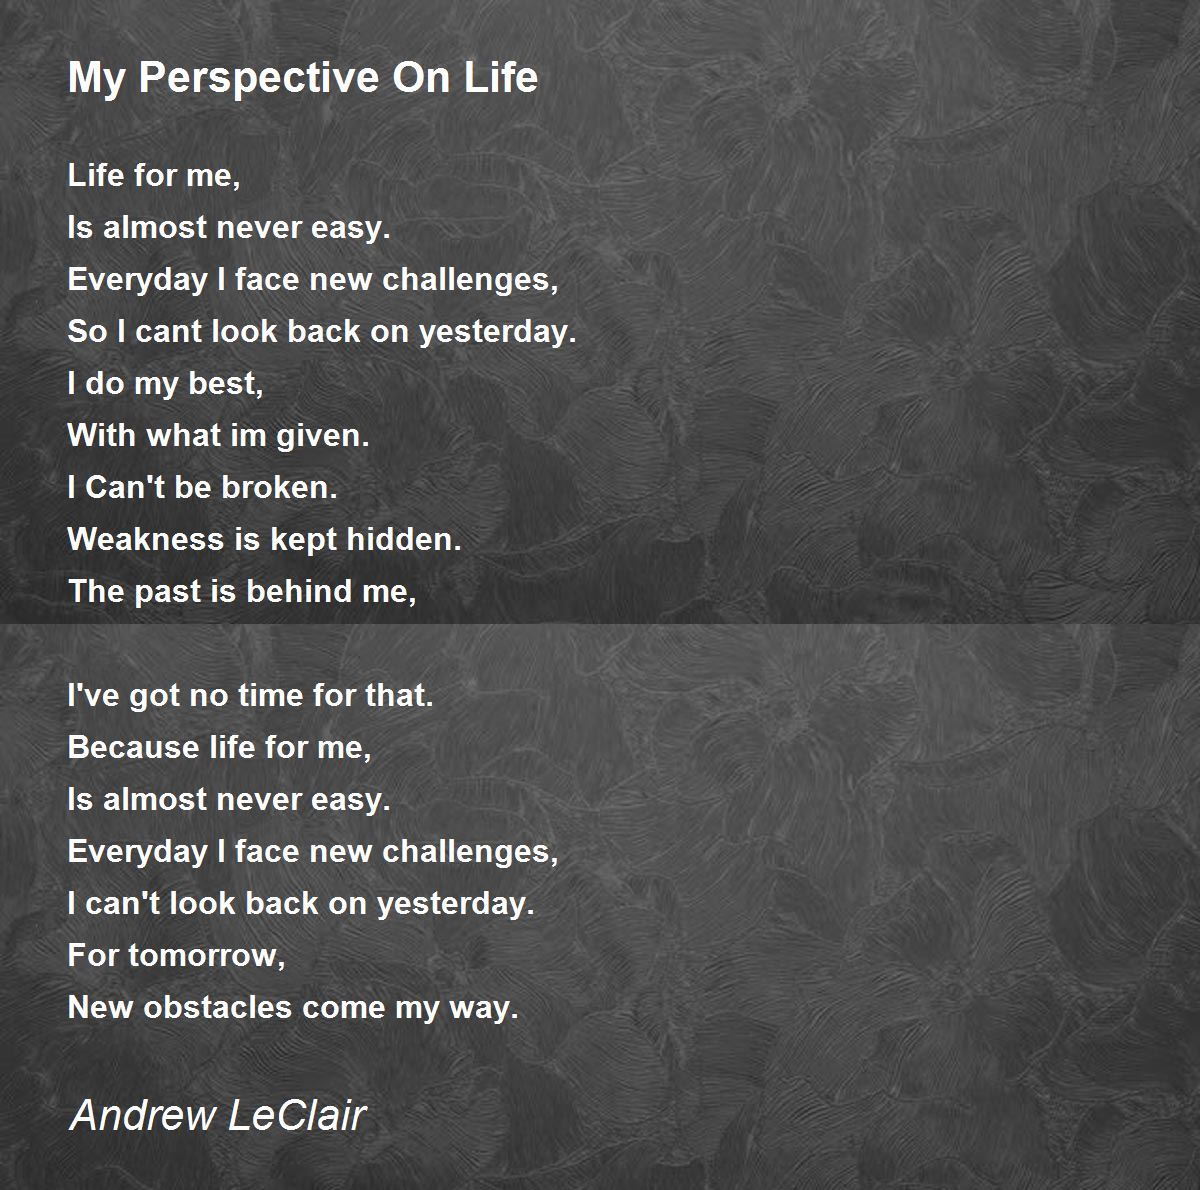 essay on perspective of life